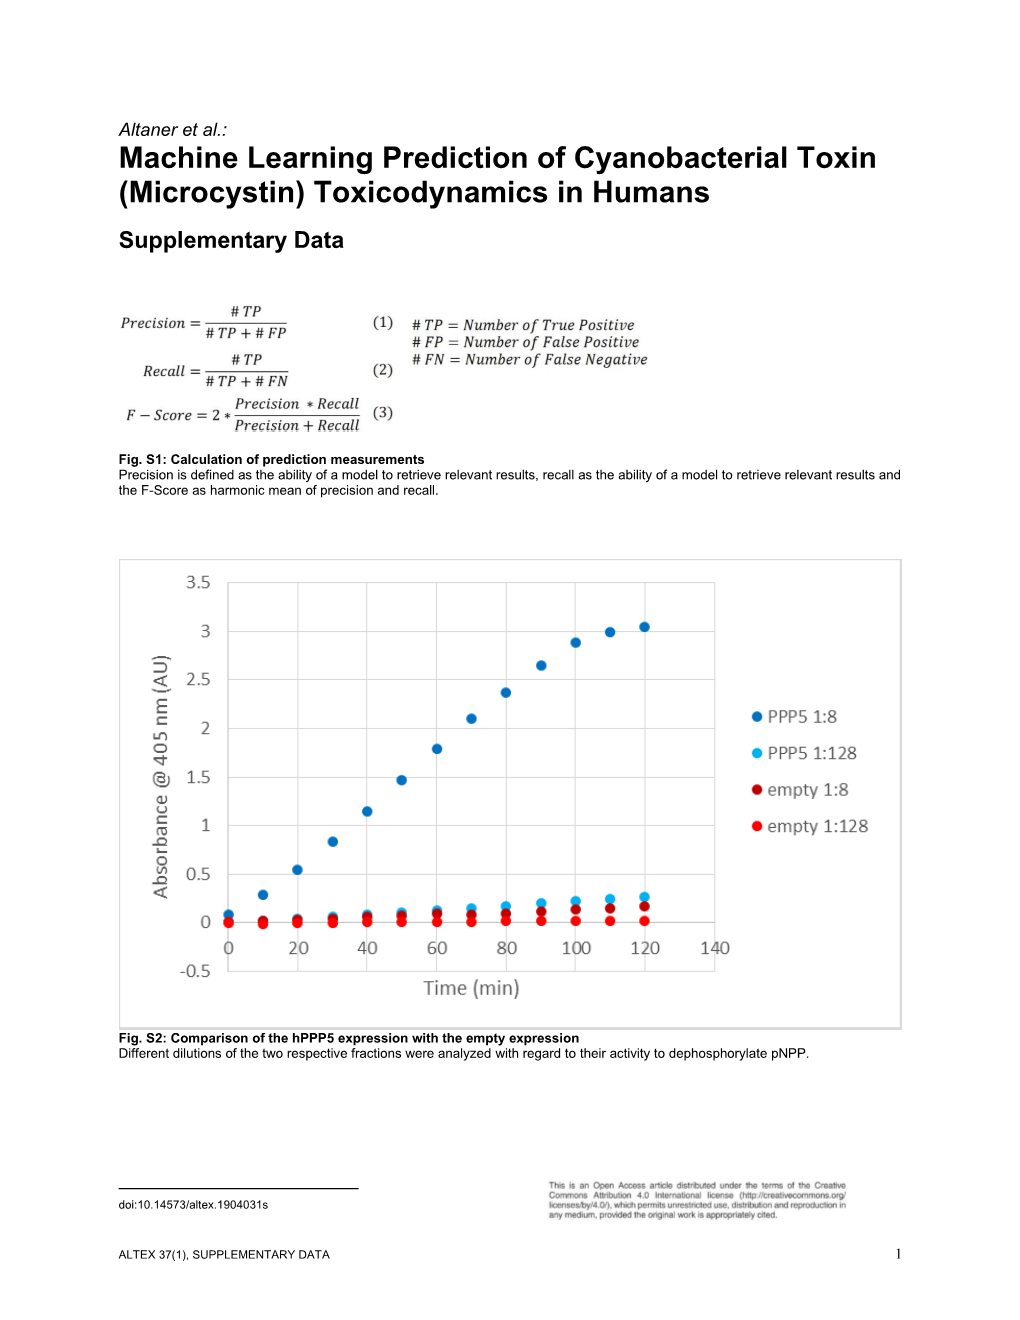 Machine Learning Prediction of Cyanobacterial Toxin (Microcystin) Toxicodynamics in Humans